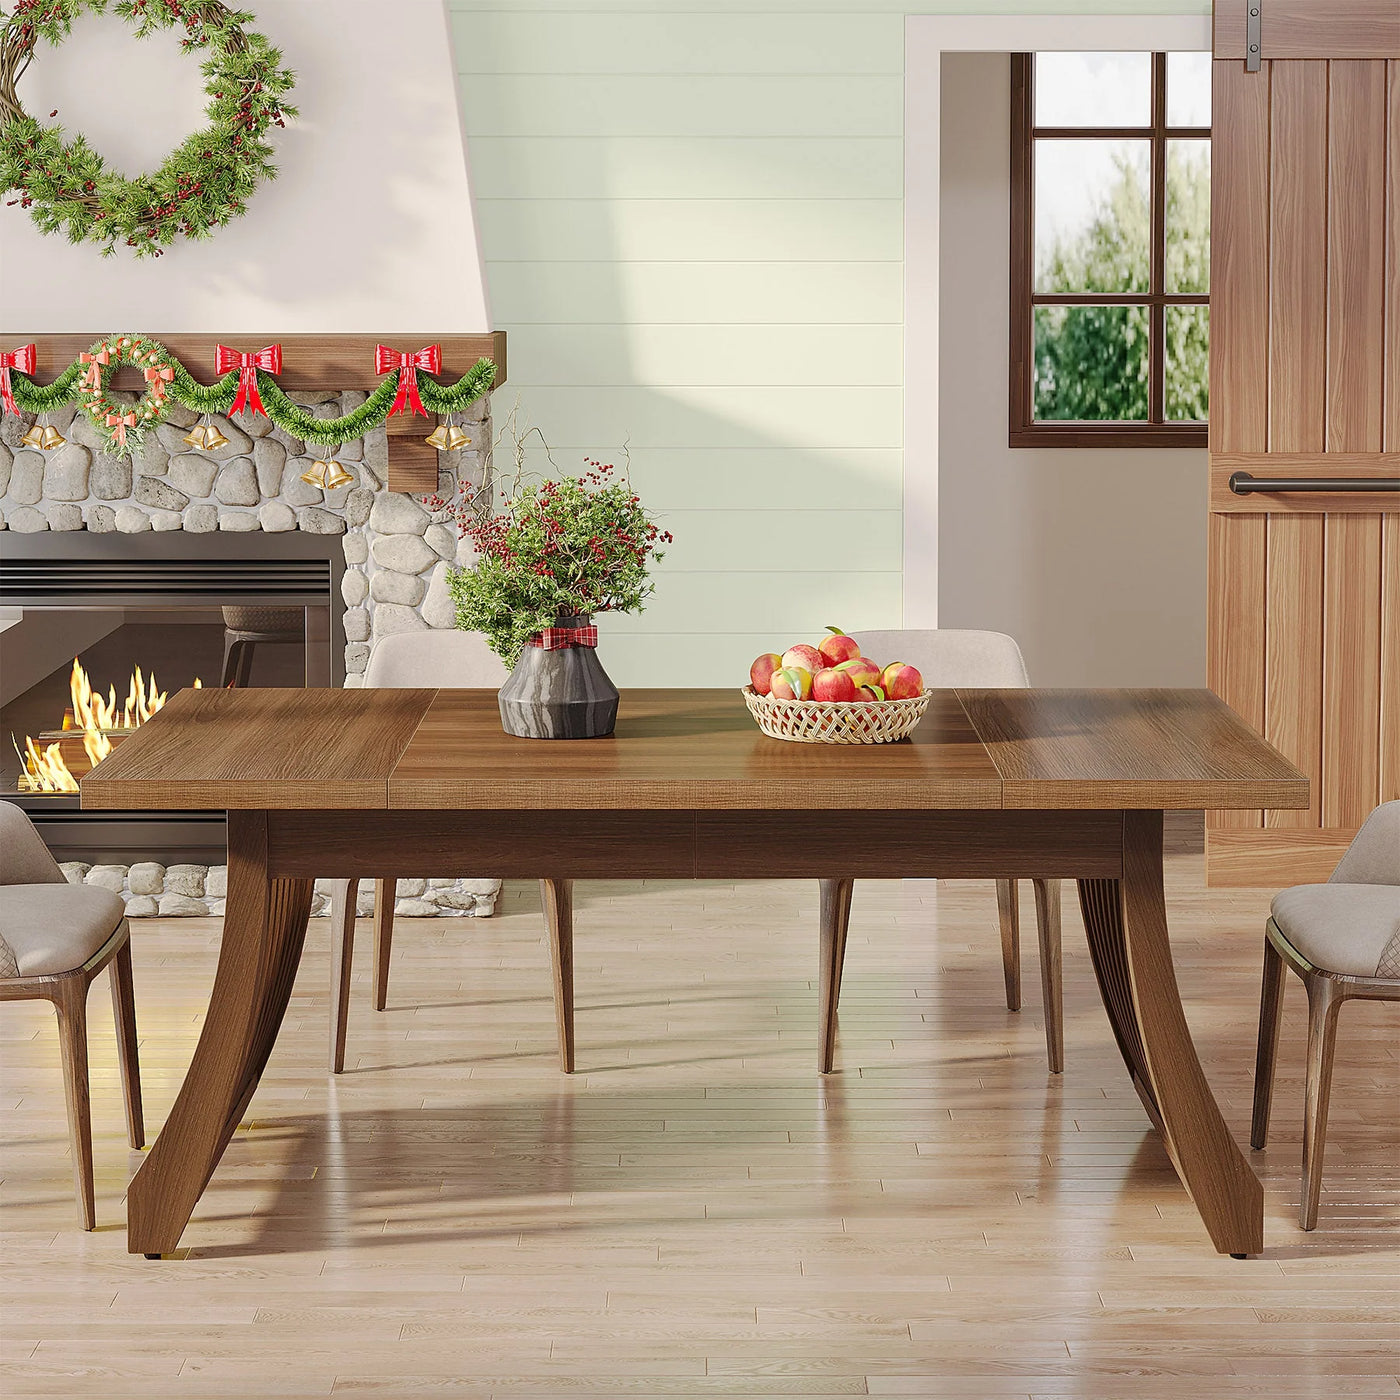 Carbella Rectangular Dining Table | Wood Kitchen Table for 6-8 People